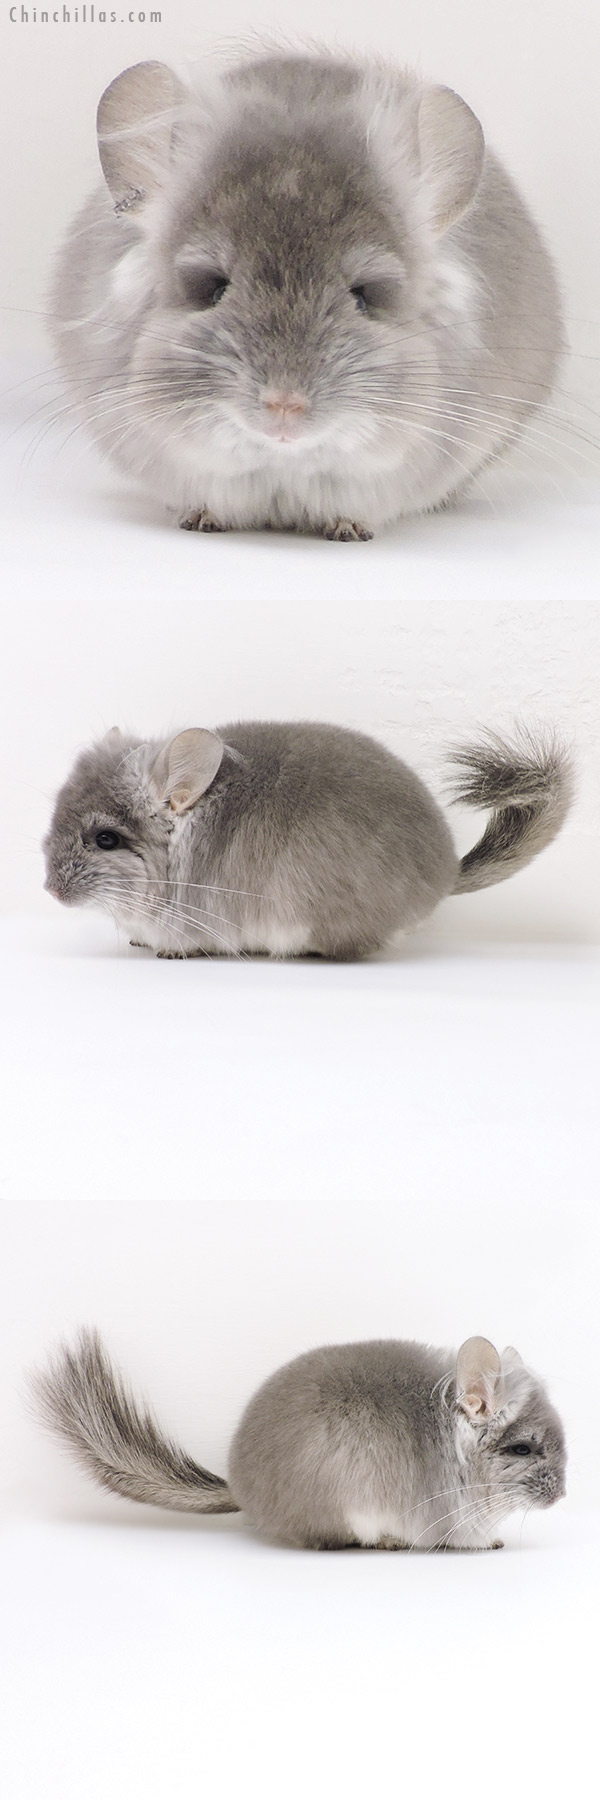 Chinchilla or related item offered for sale or export on Chinchillas.com - 17210 Violet  Royal Persian Angora Male Chinchilla with Ear Tufts